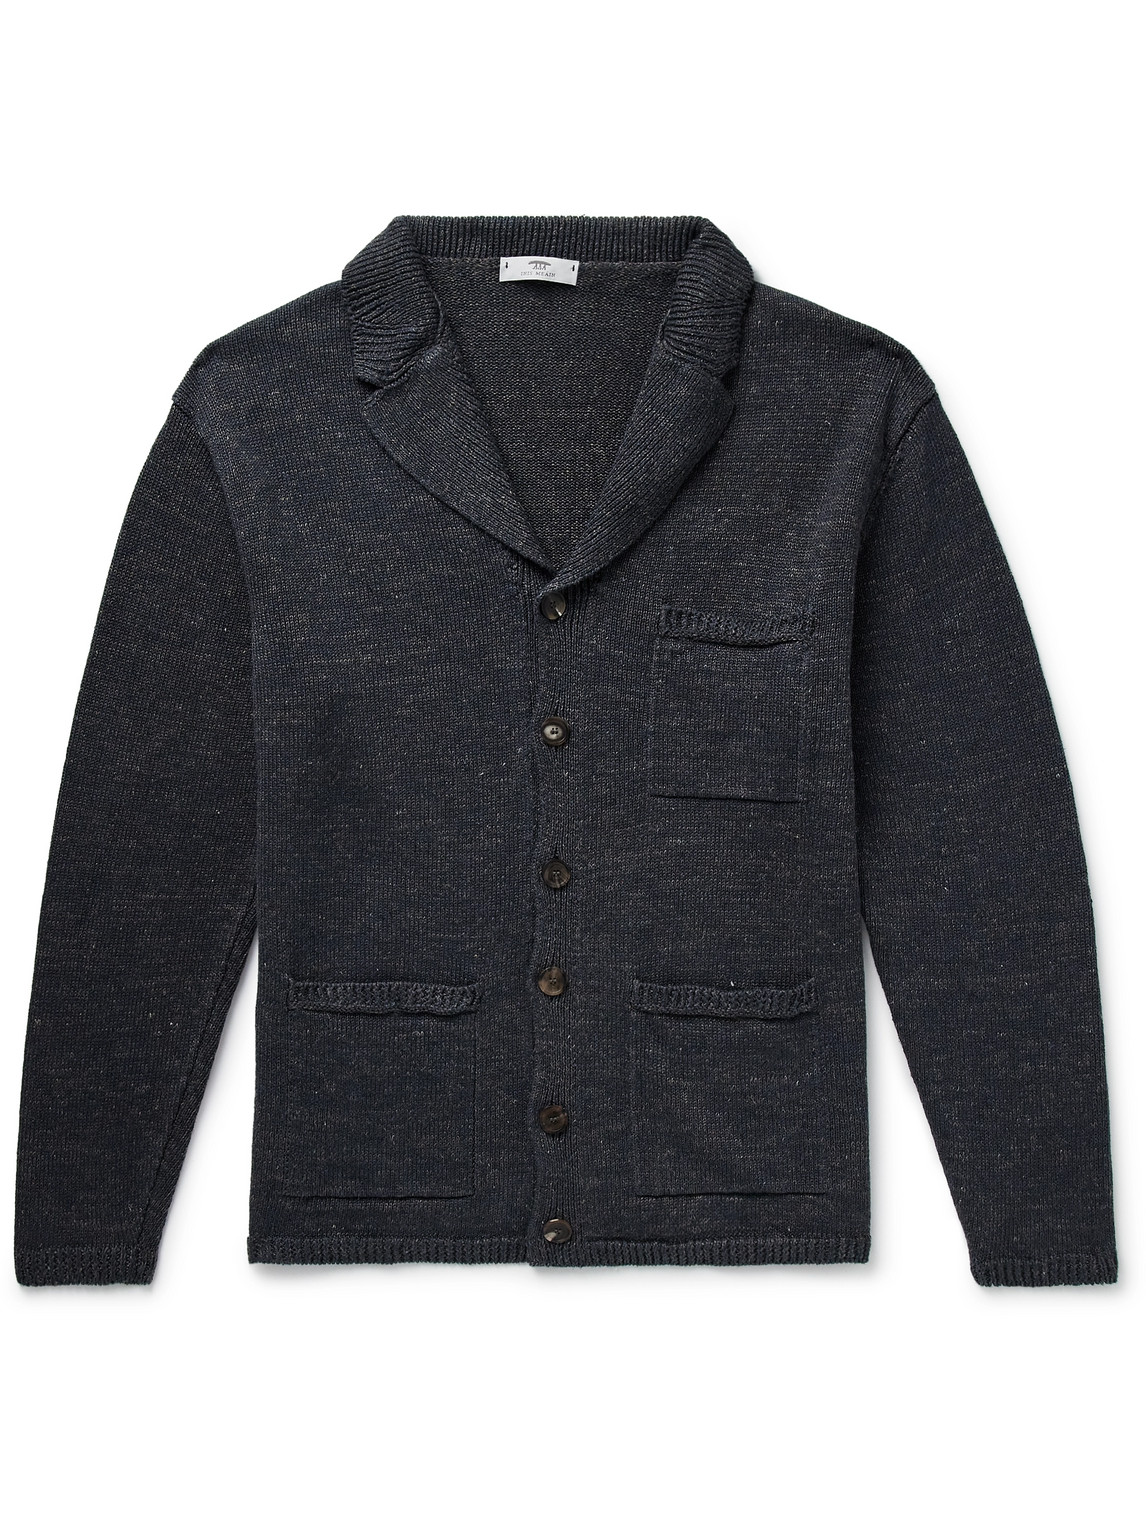 Inis Meain Pub Jacket Linen-blend Cardigan In Gray